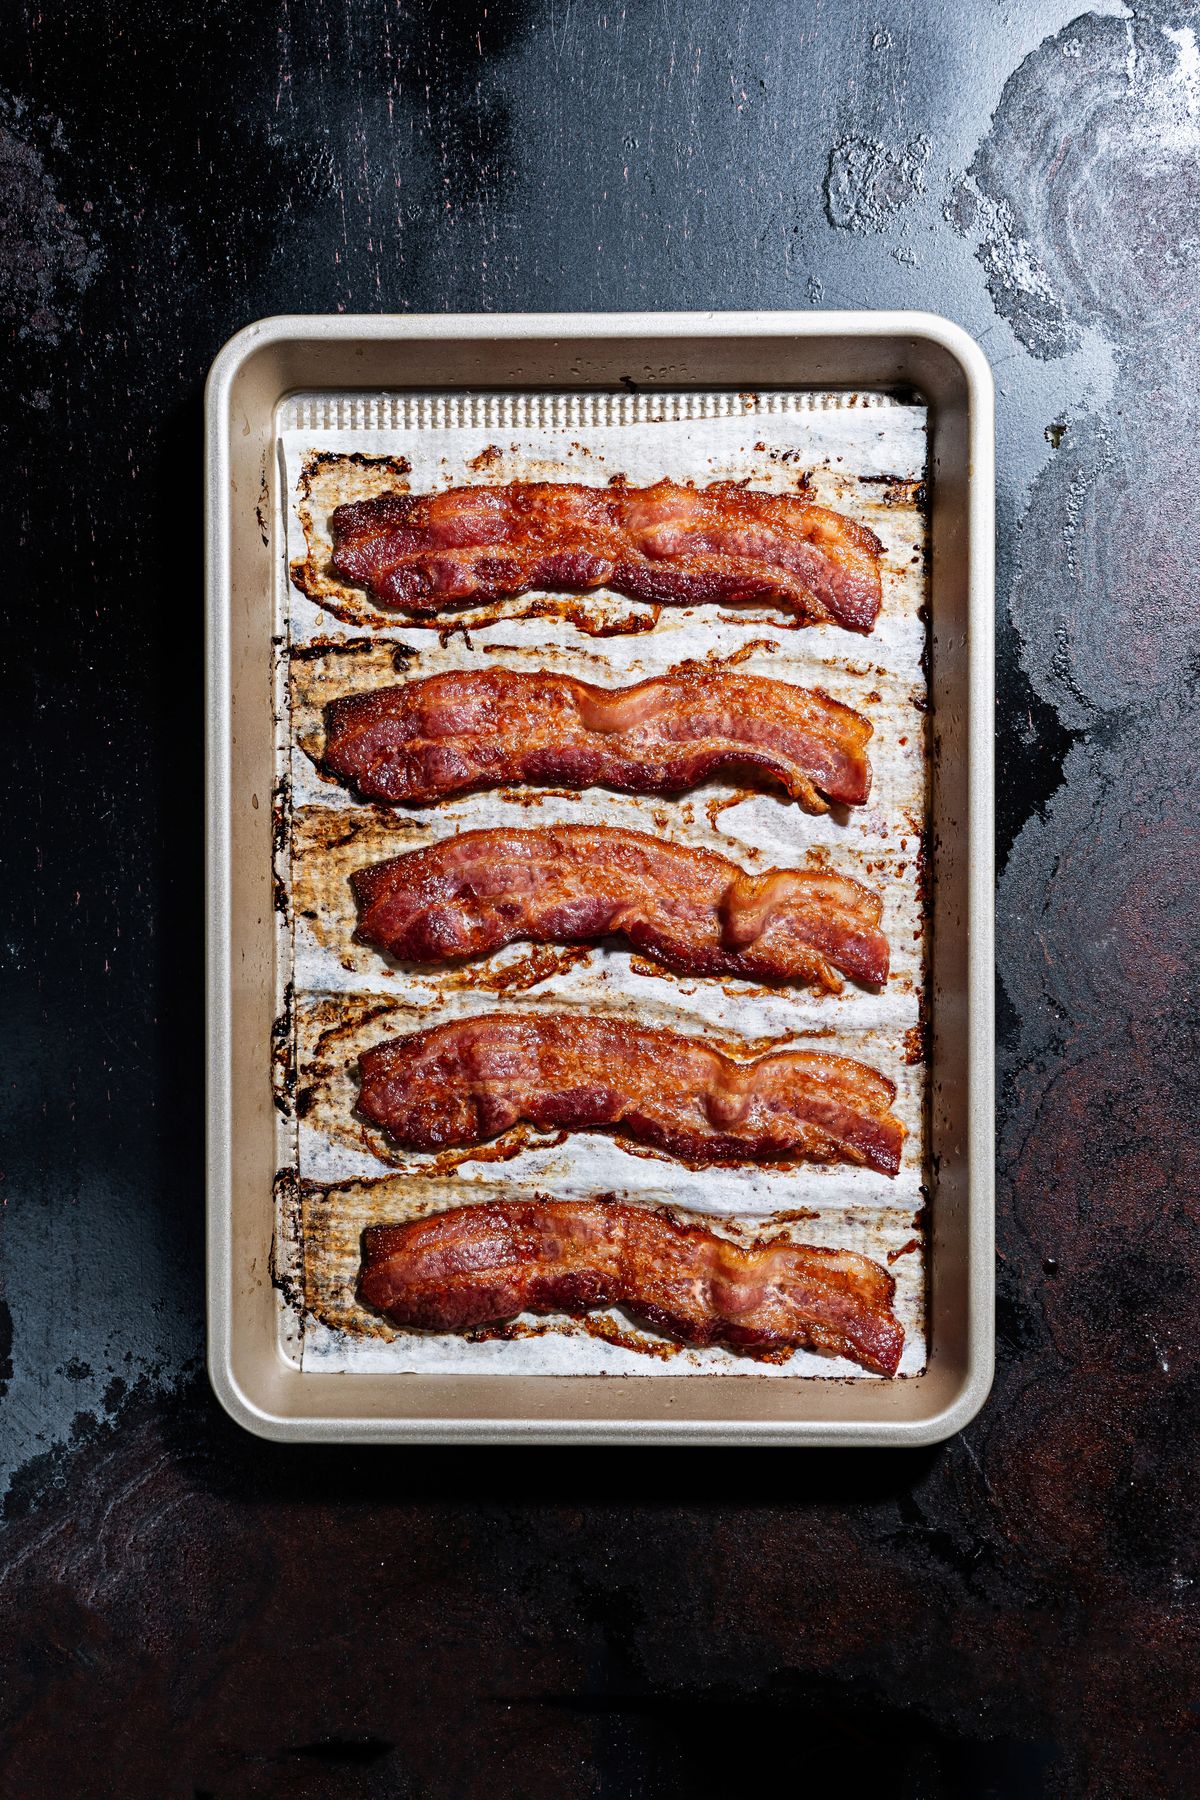 Bacon cooked in an oven on a sheet pan.  (Scott Suchman/For the Washington Post)